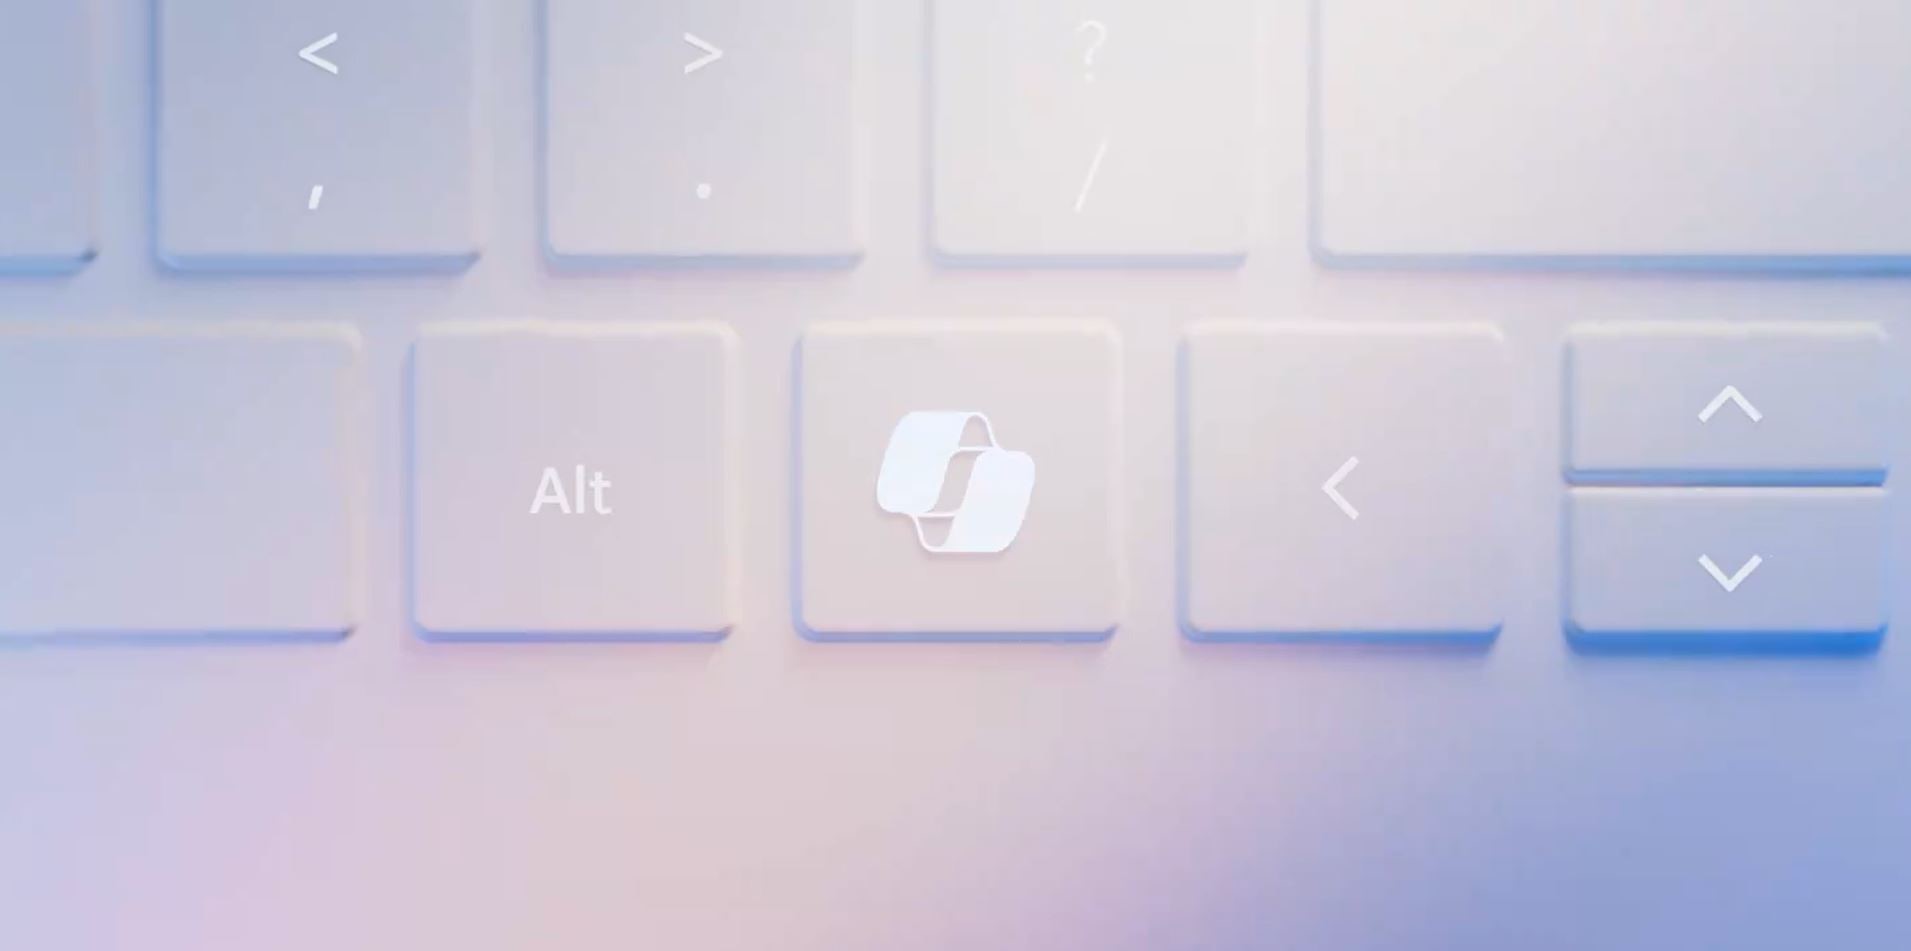 A top-down view of a very light blue-purple keyboard with an overlapping symbol on a key between the "Alt" key and the left arrow key.